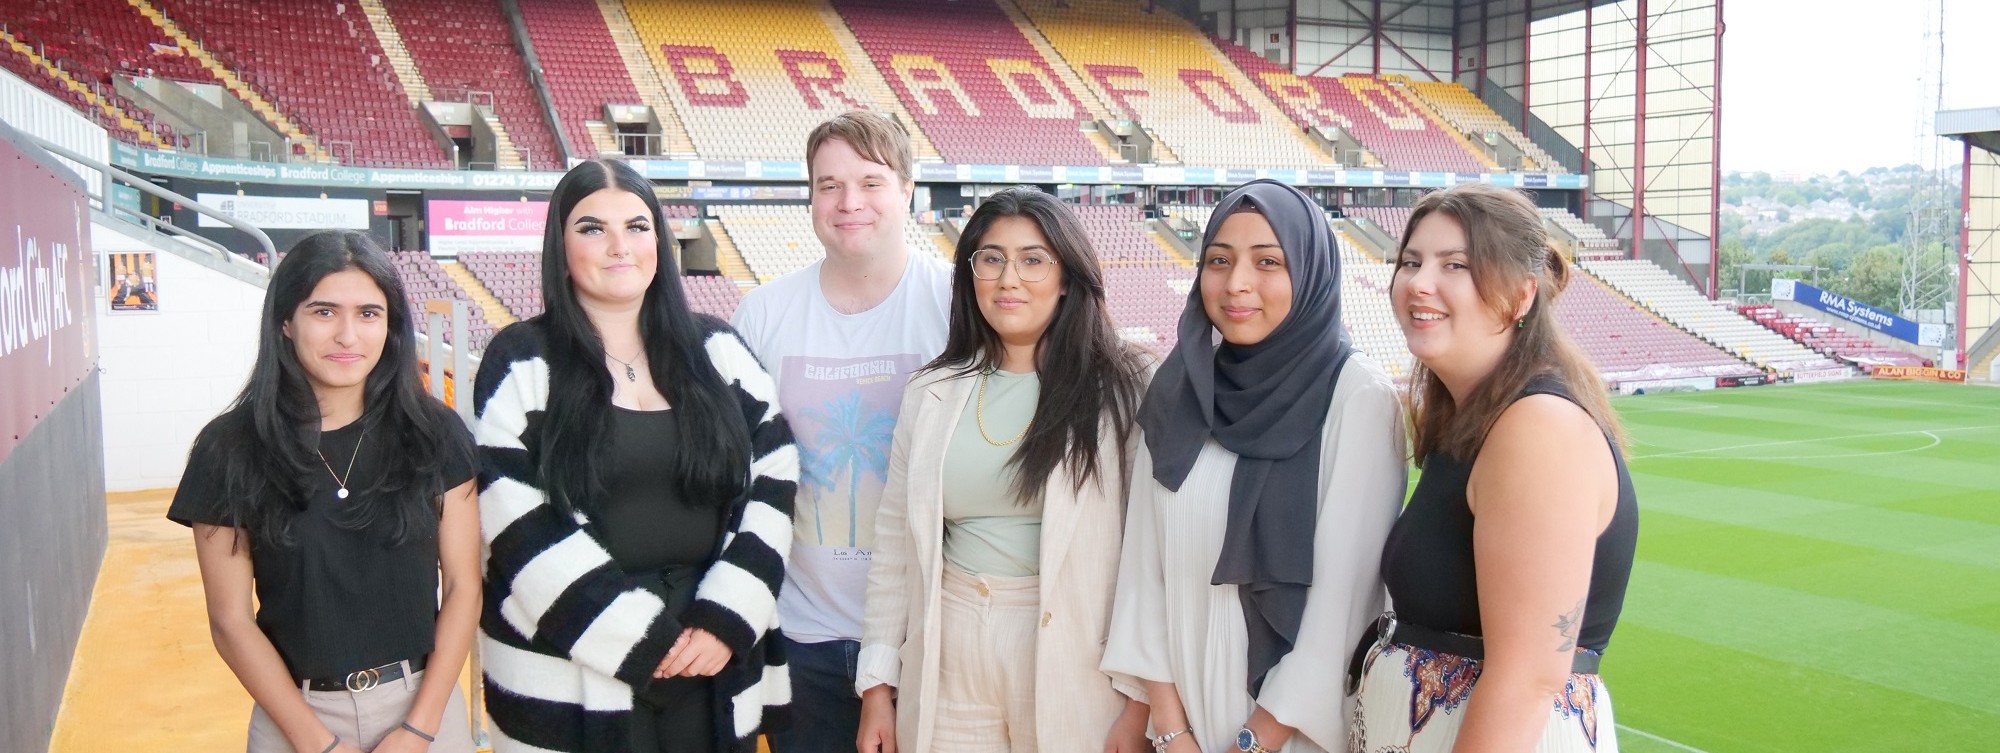 Northern joins forces with Bradford students to encourage young people across West Yorkshire to report unwanted sexual behaviour Northern